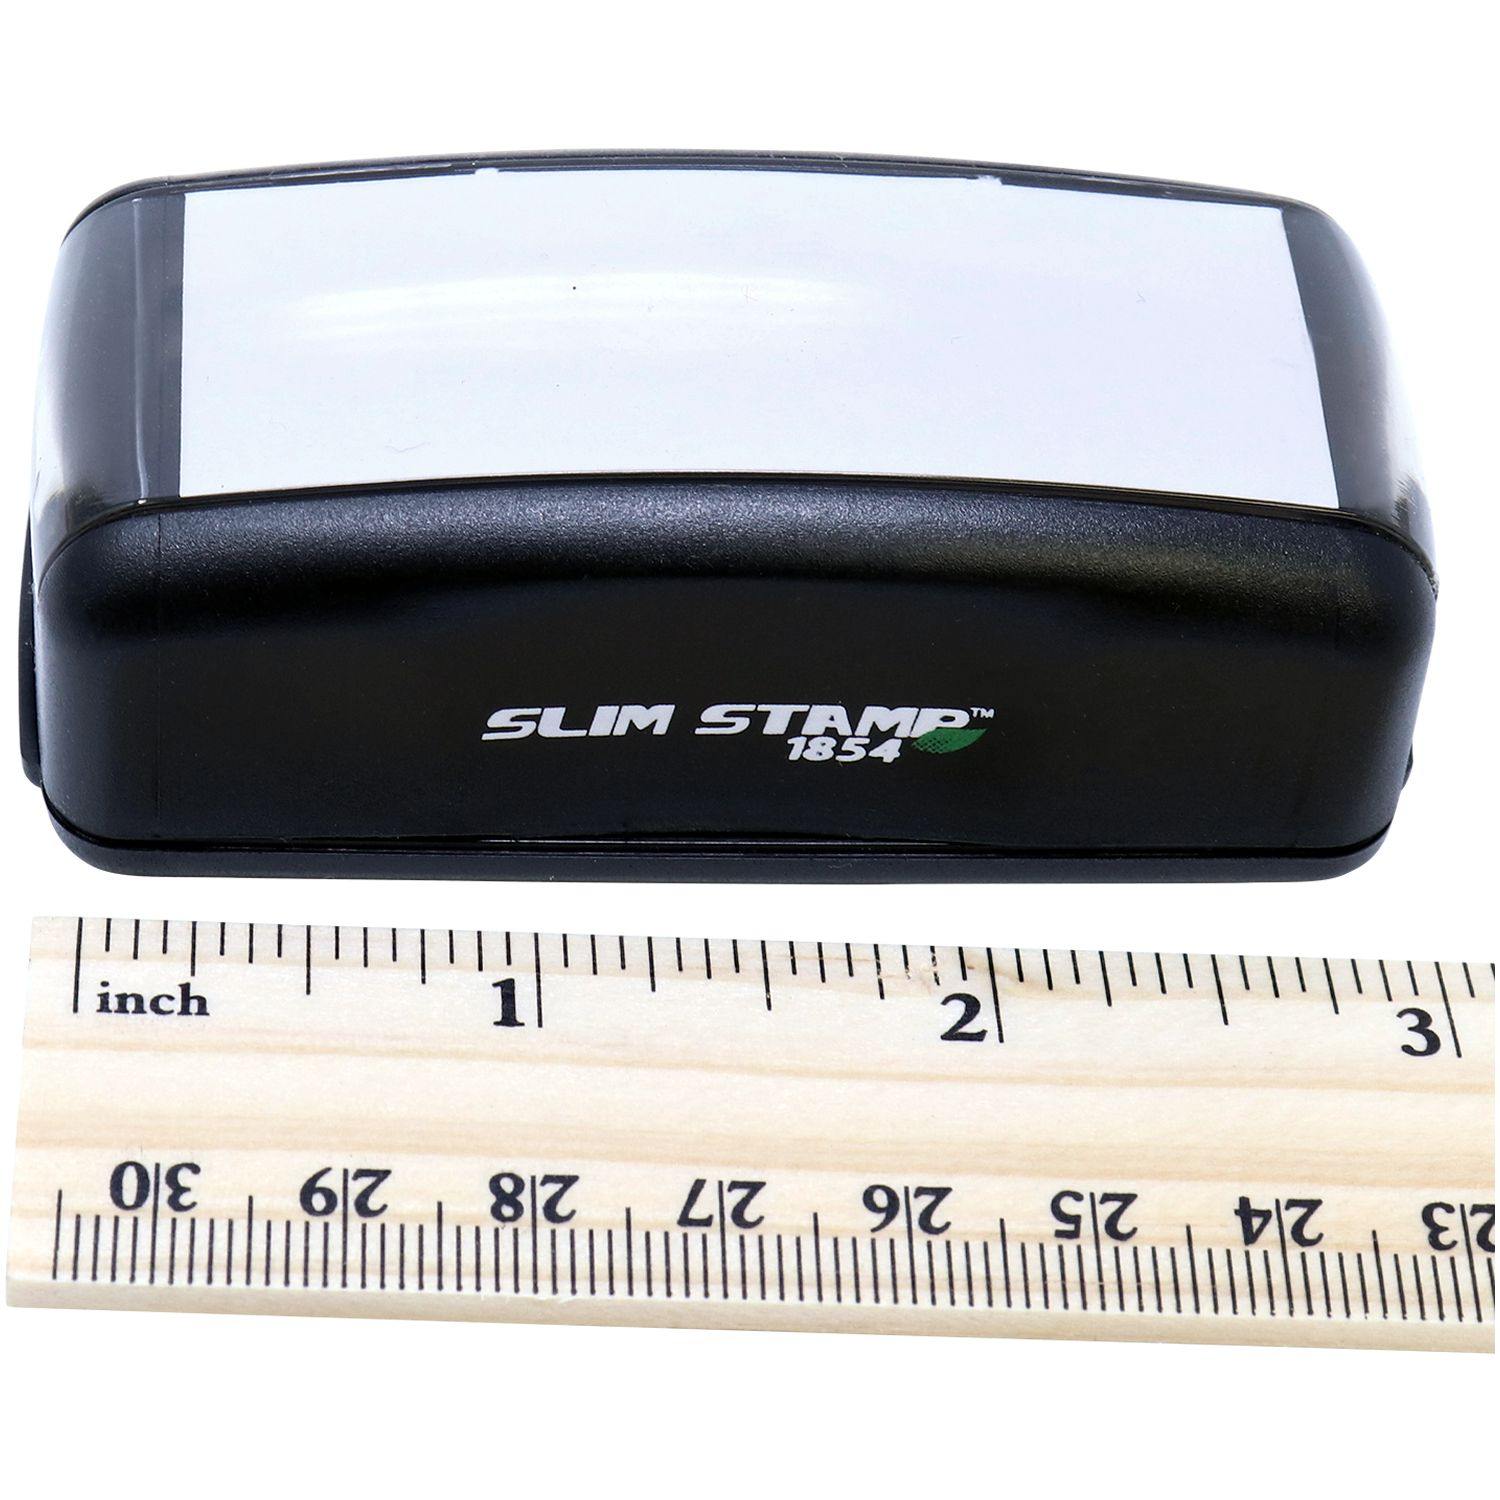 Measurement Large Pre Inked Hmo Stamp with Ruler